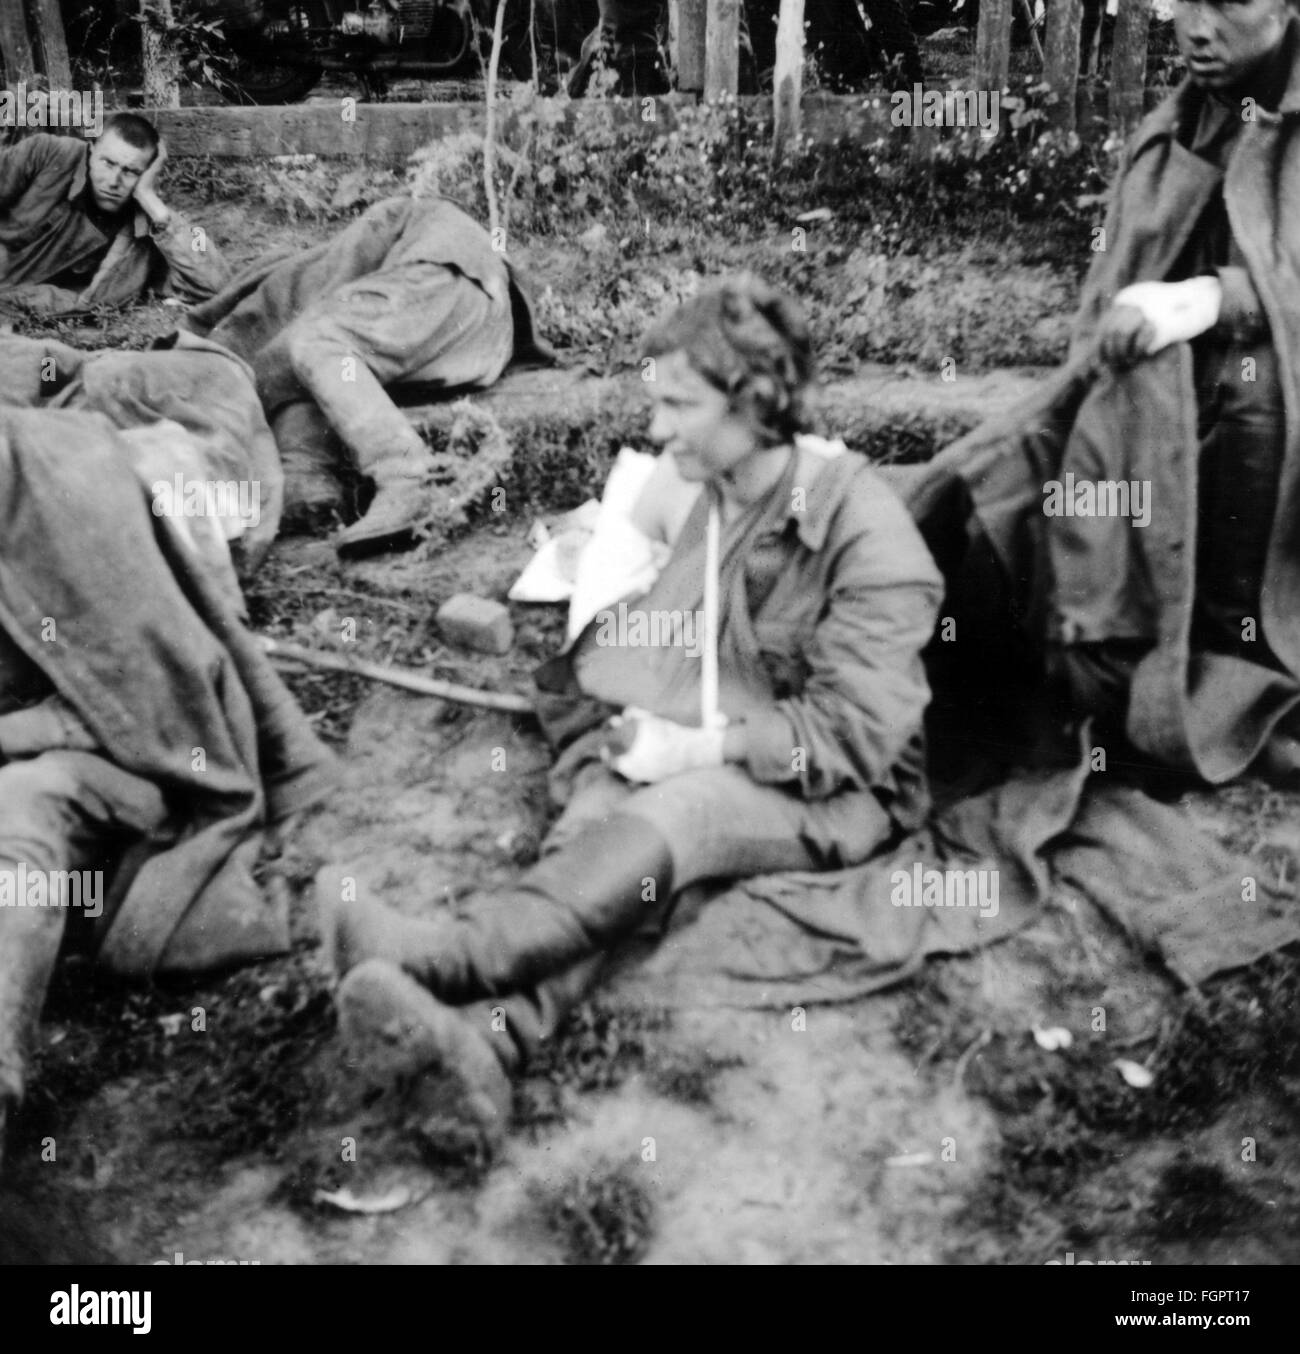 Second World War / WWII, Soviet Union, summer 1941, wounded Soviet prisoners of war, Ukraine, Army Group South, Additional-Rights-Clearences-Not Available Stock Photo